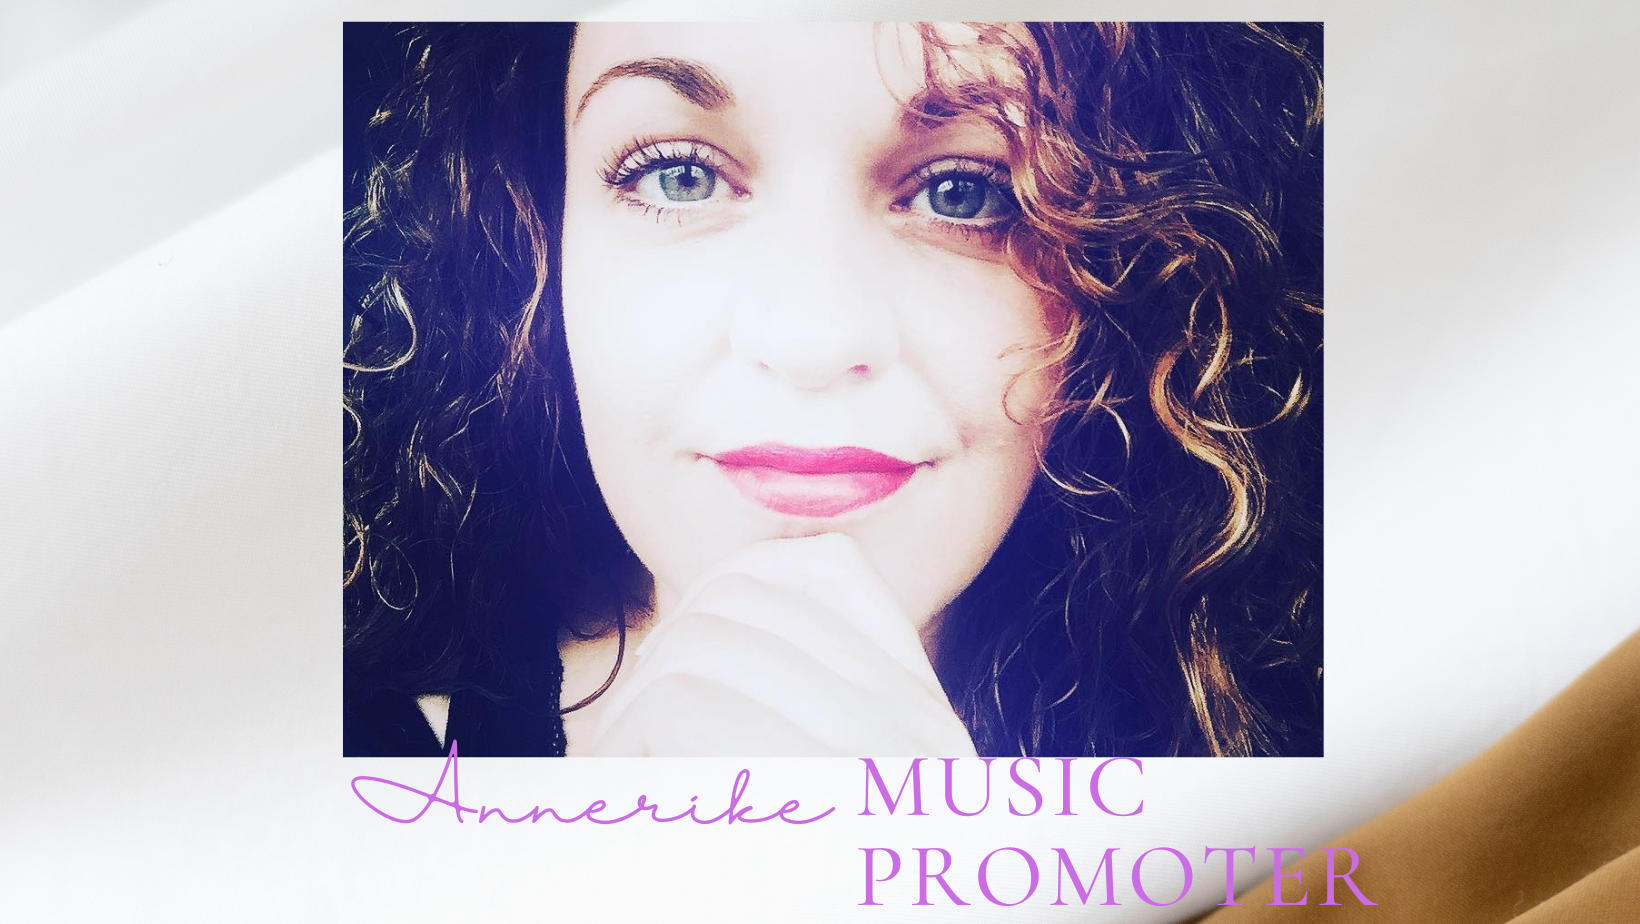 Annerike Music Promotion